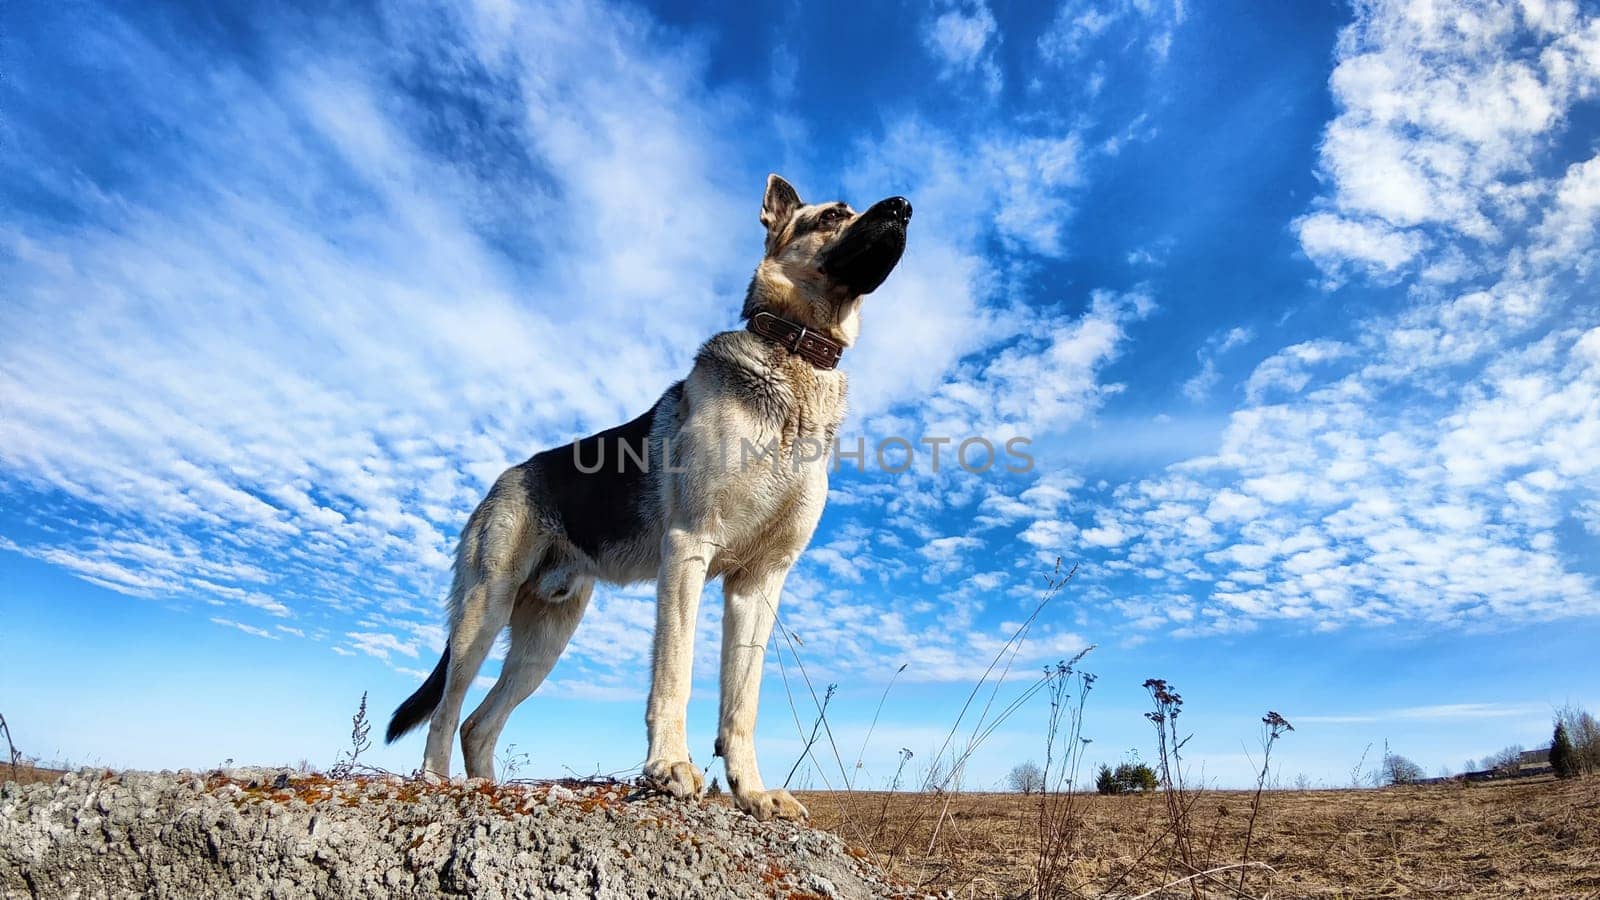 Dog German Shepherd on big stone in field with dry yellow grass, blue sky with white clouds on background in sunny autumn or spring day. Russian eastern European dog veo